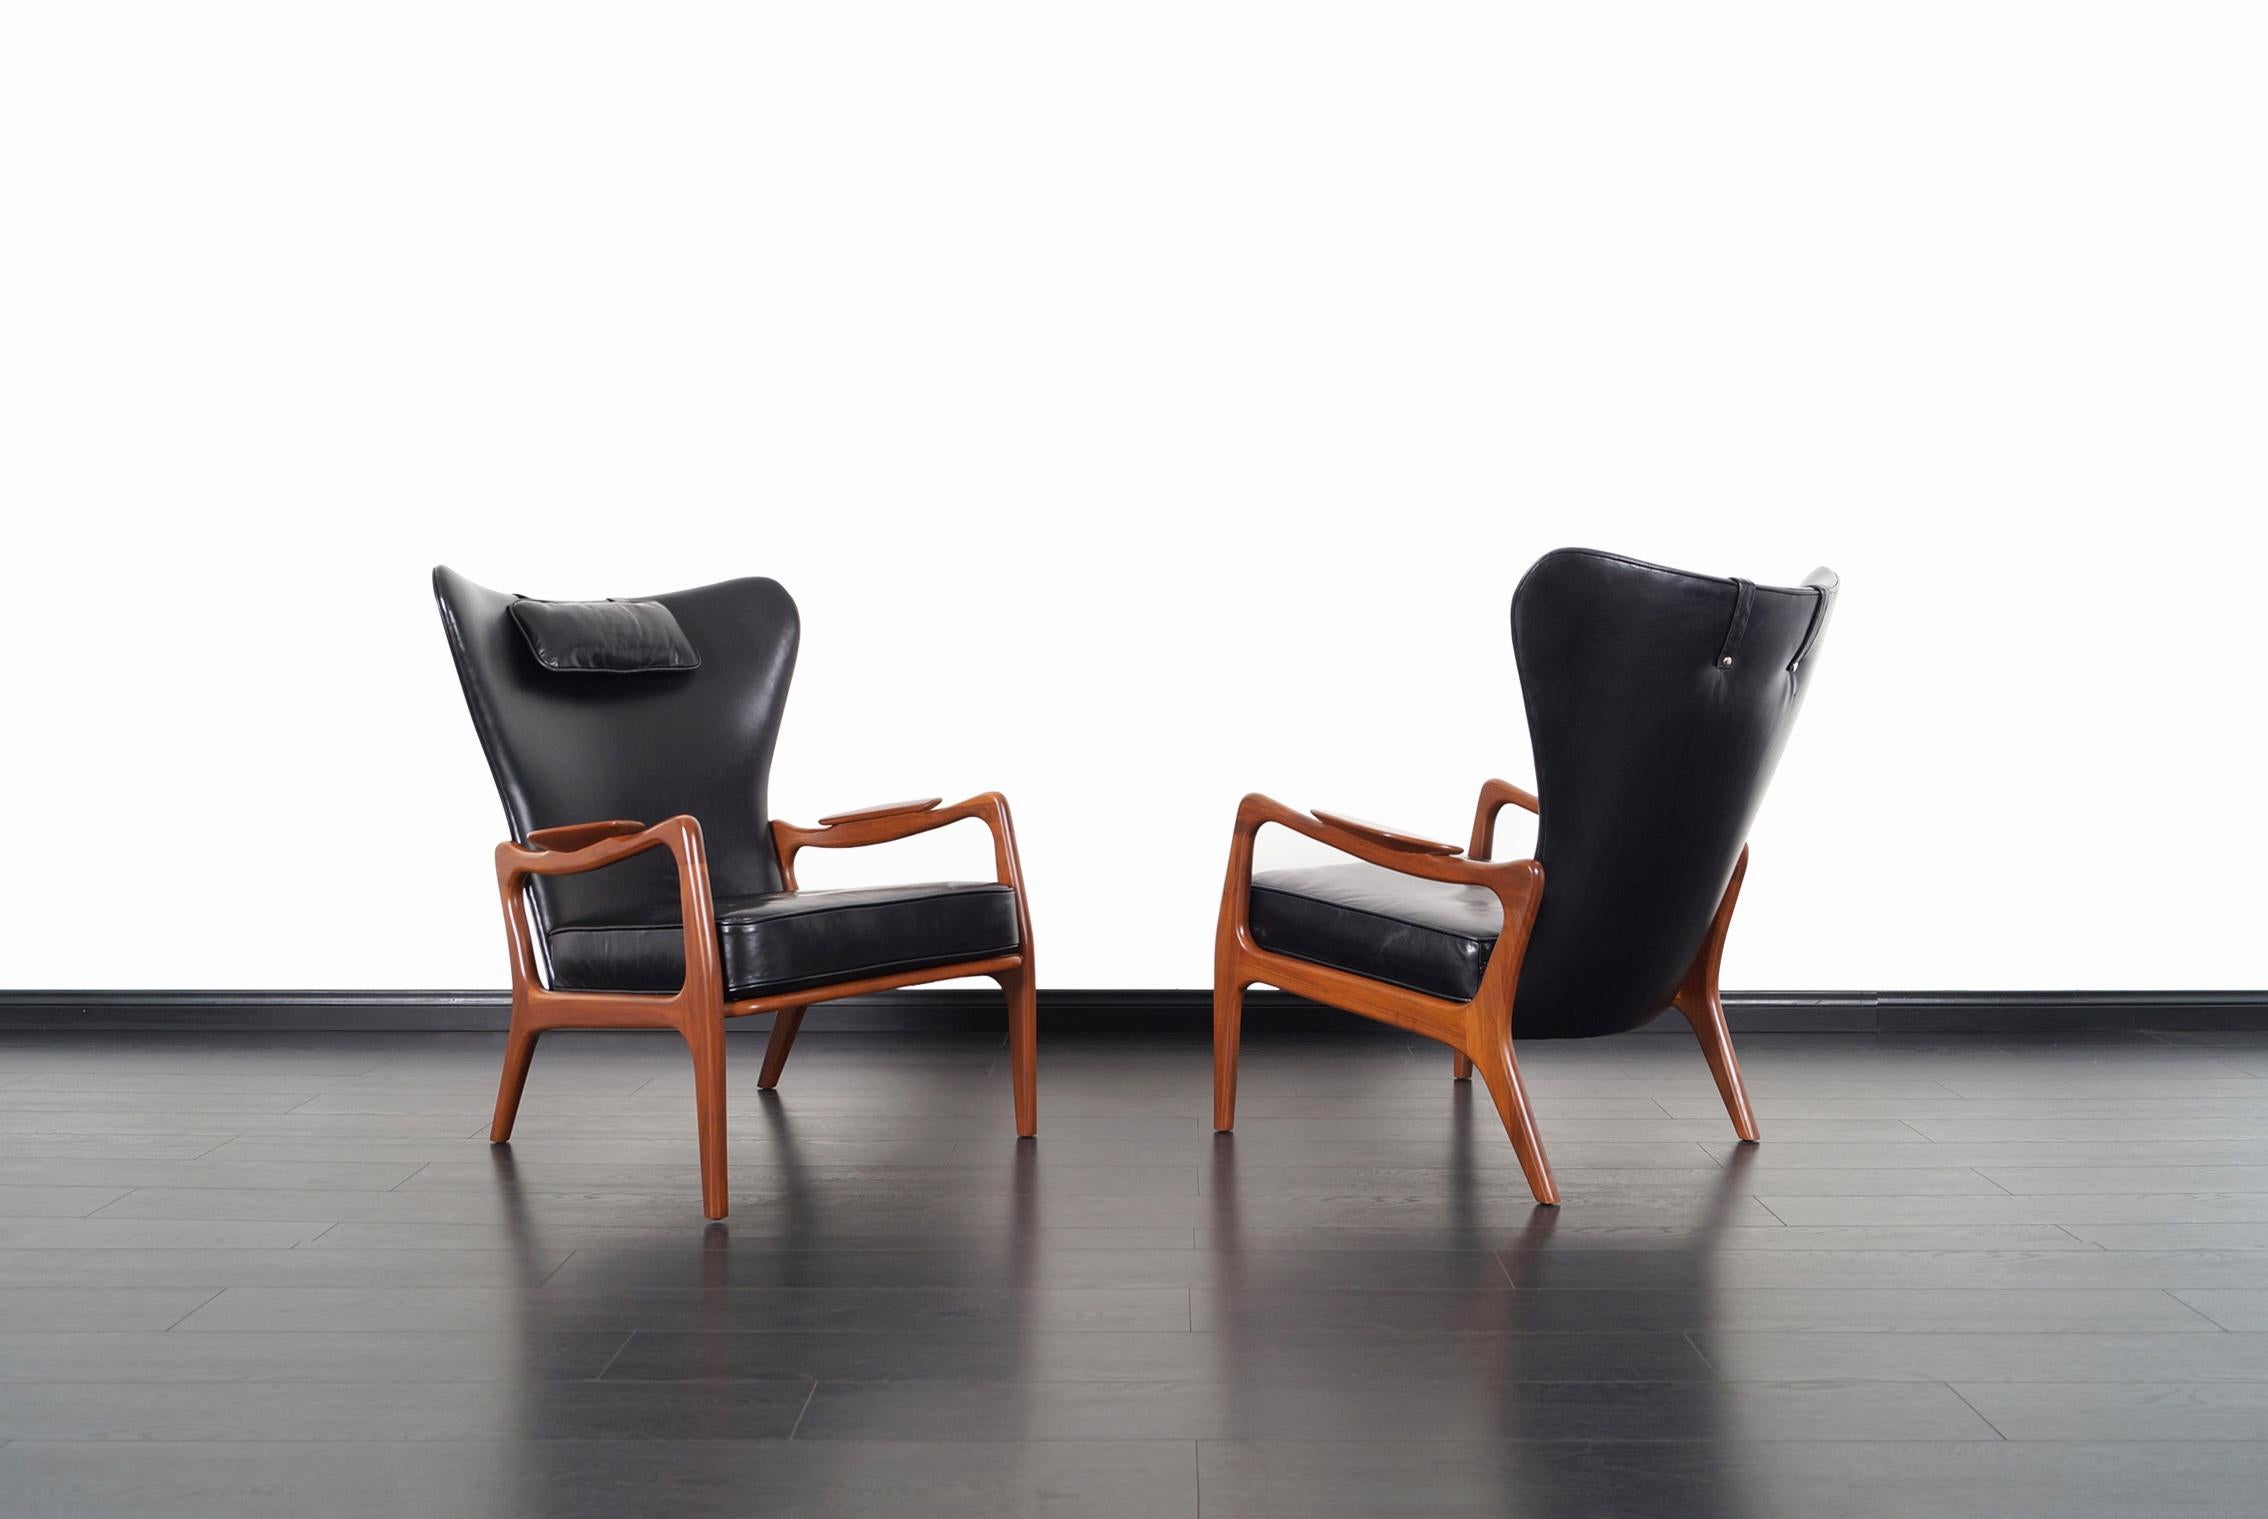 Visually stunning pair of leather lounge chairs designed by Adrian Pearsall for Craft Associates in the United States, circa 1960s. This rare pair of wingback chairs, also known as model 1410-C features a sculptural walnut frame with a striking